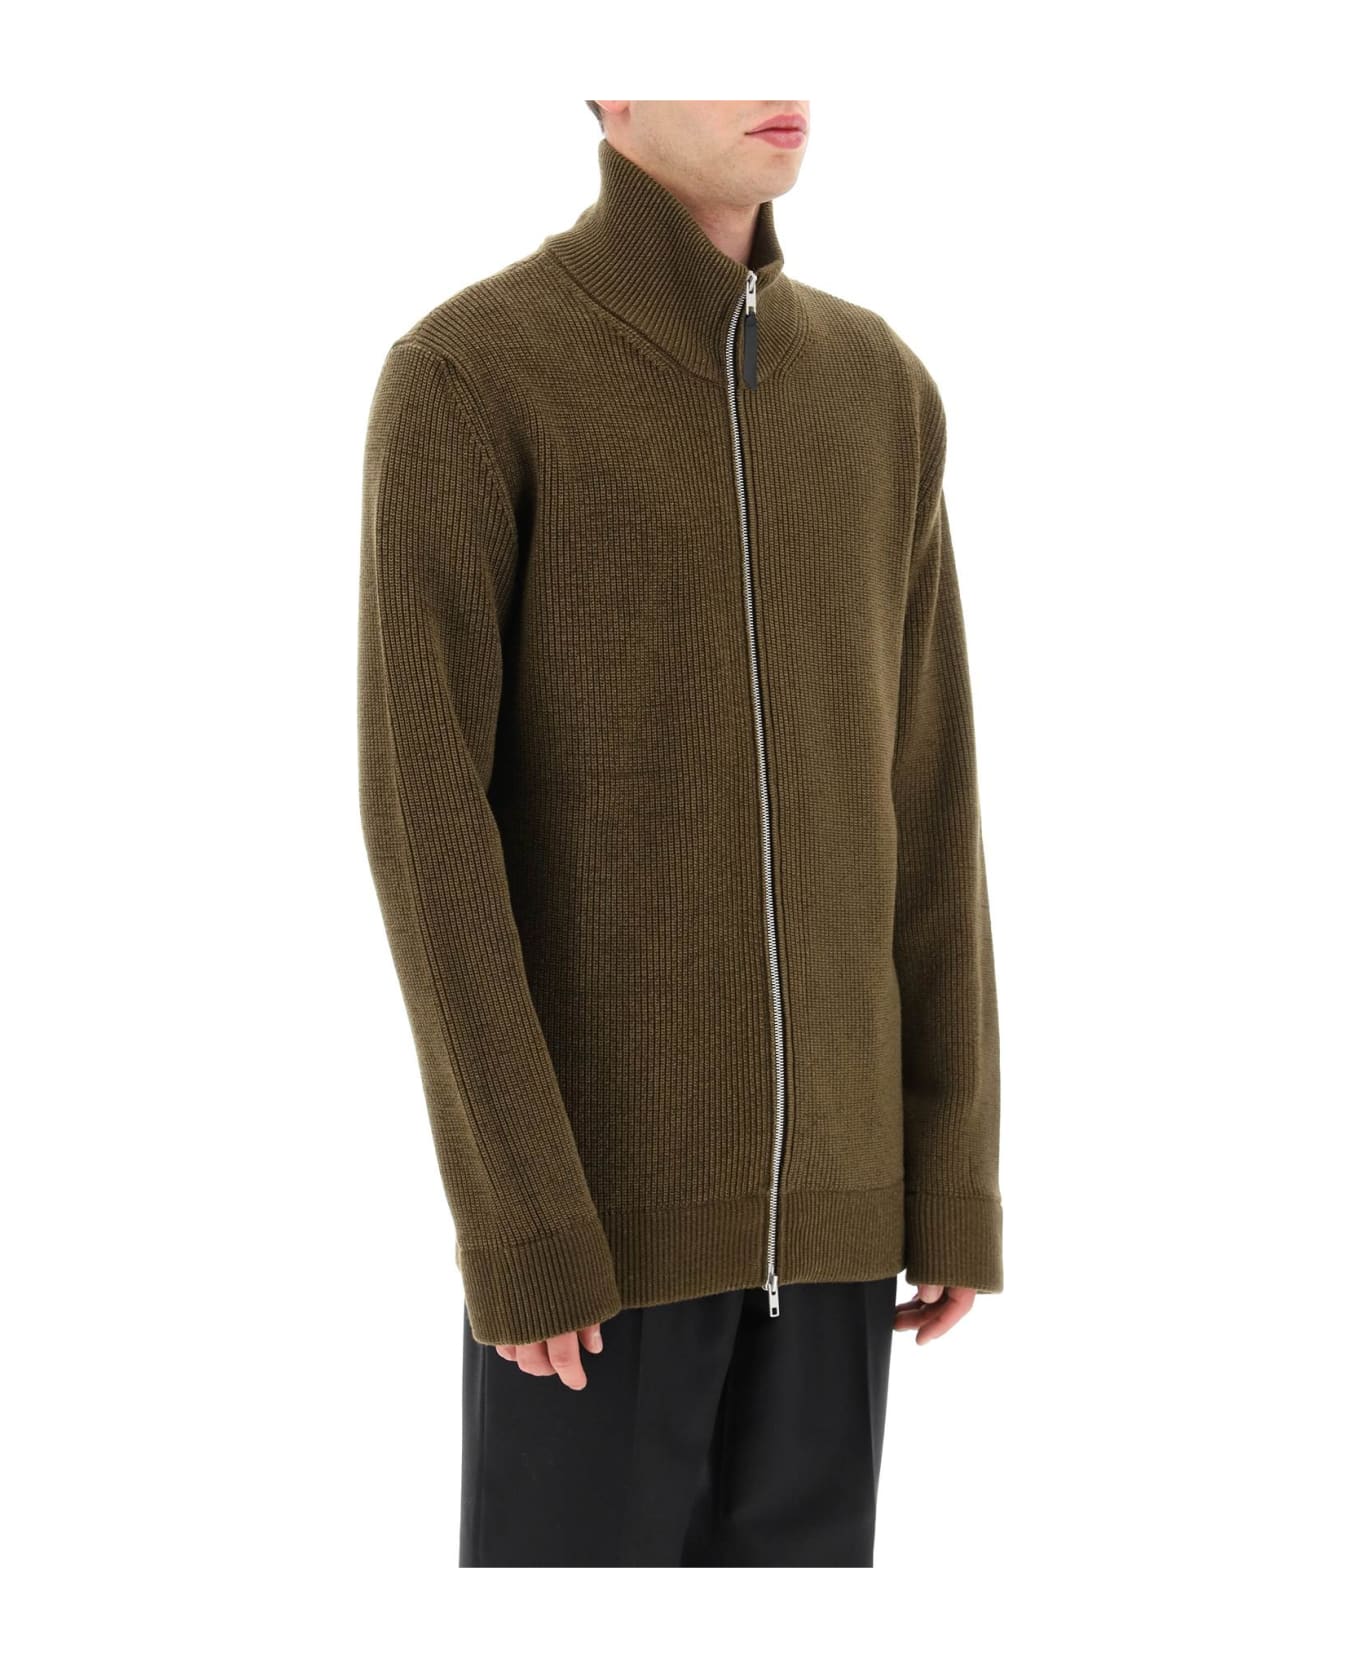 Maison Margiela Knitted Cardigan With Zip - OLIVE (Green)